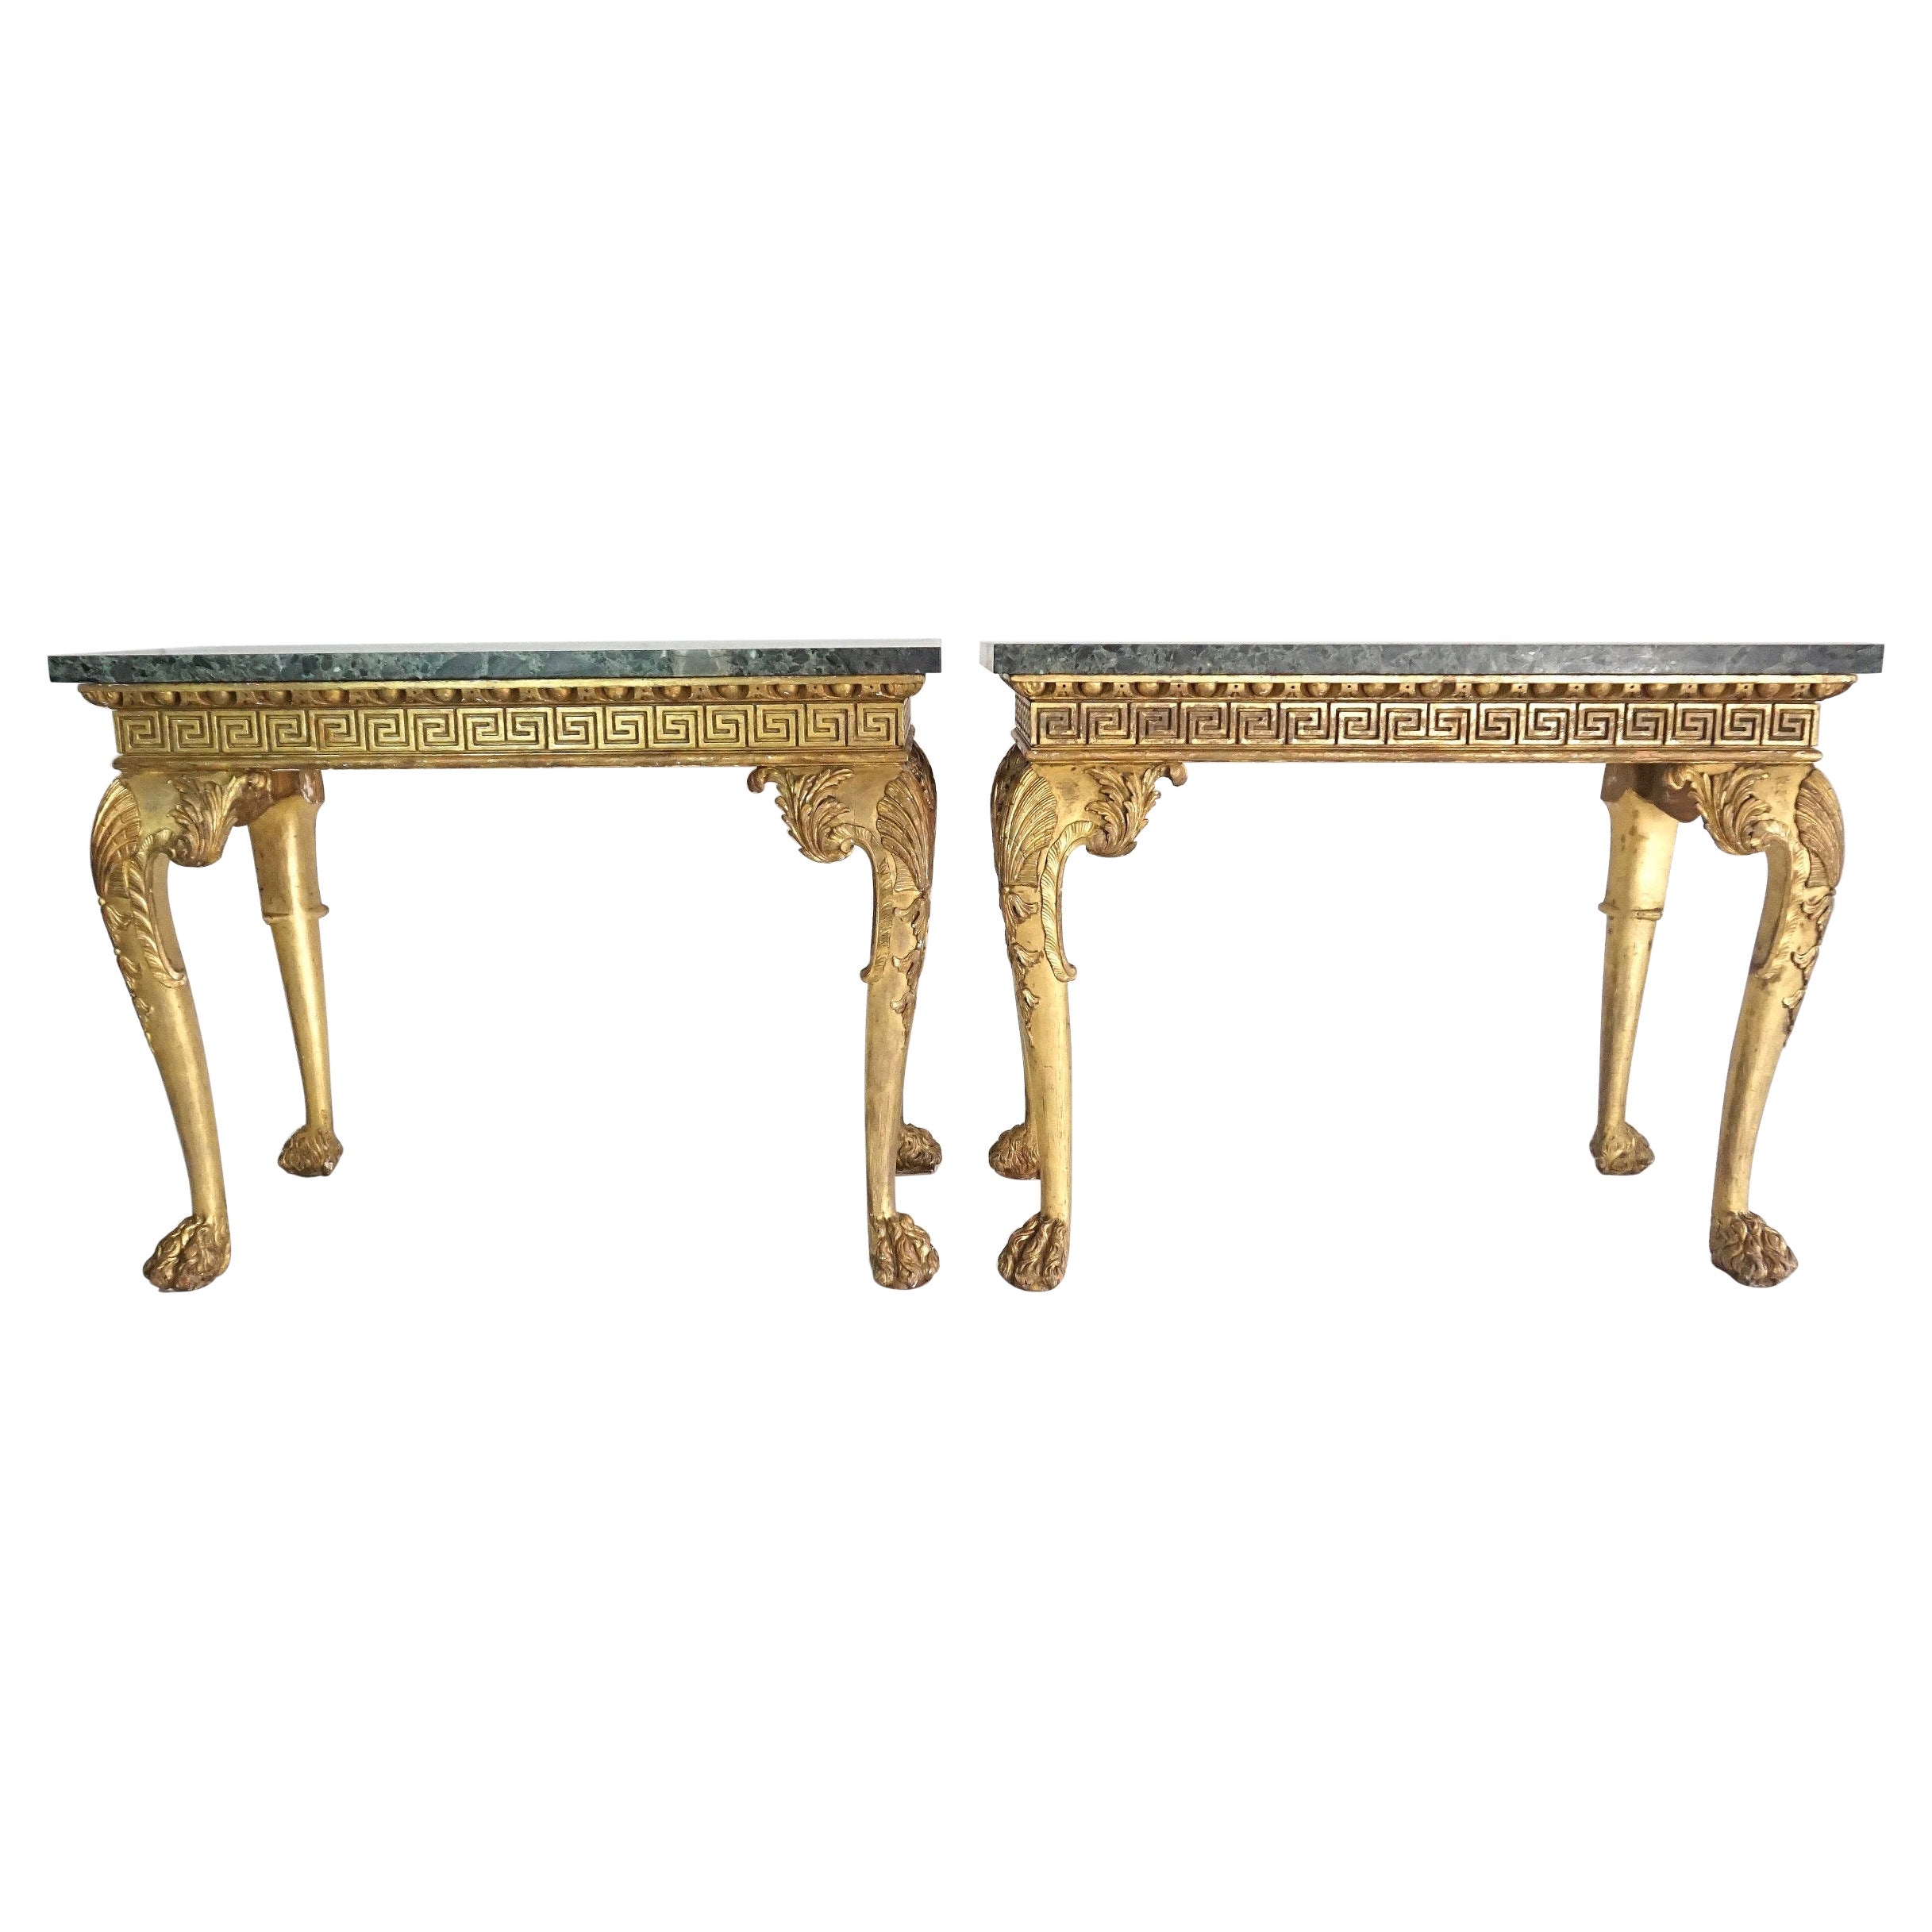 Anglo-Irish Regency Giltwood Side Tables, Manner of William Kent, circa 1815 For Sale